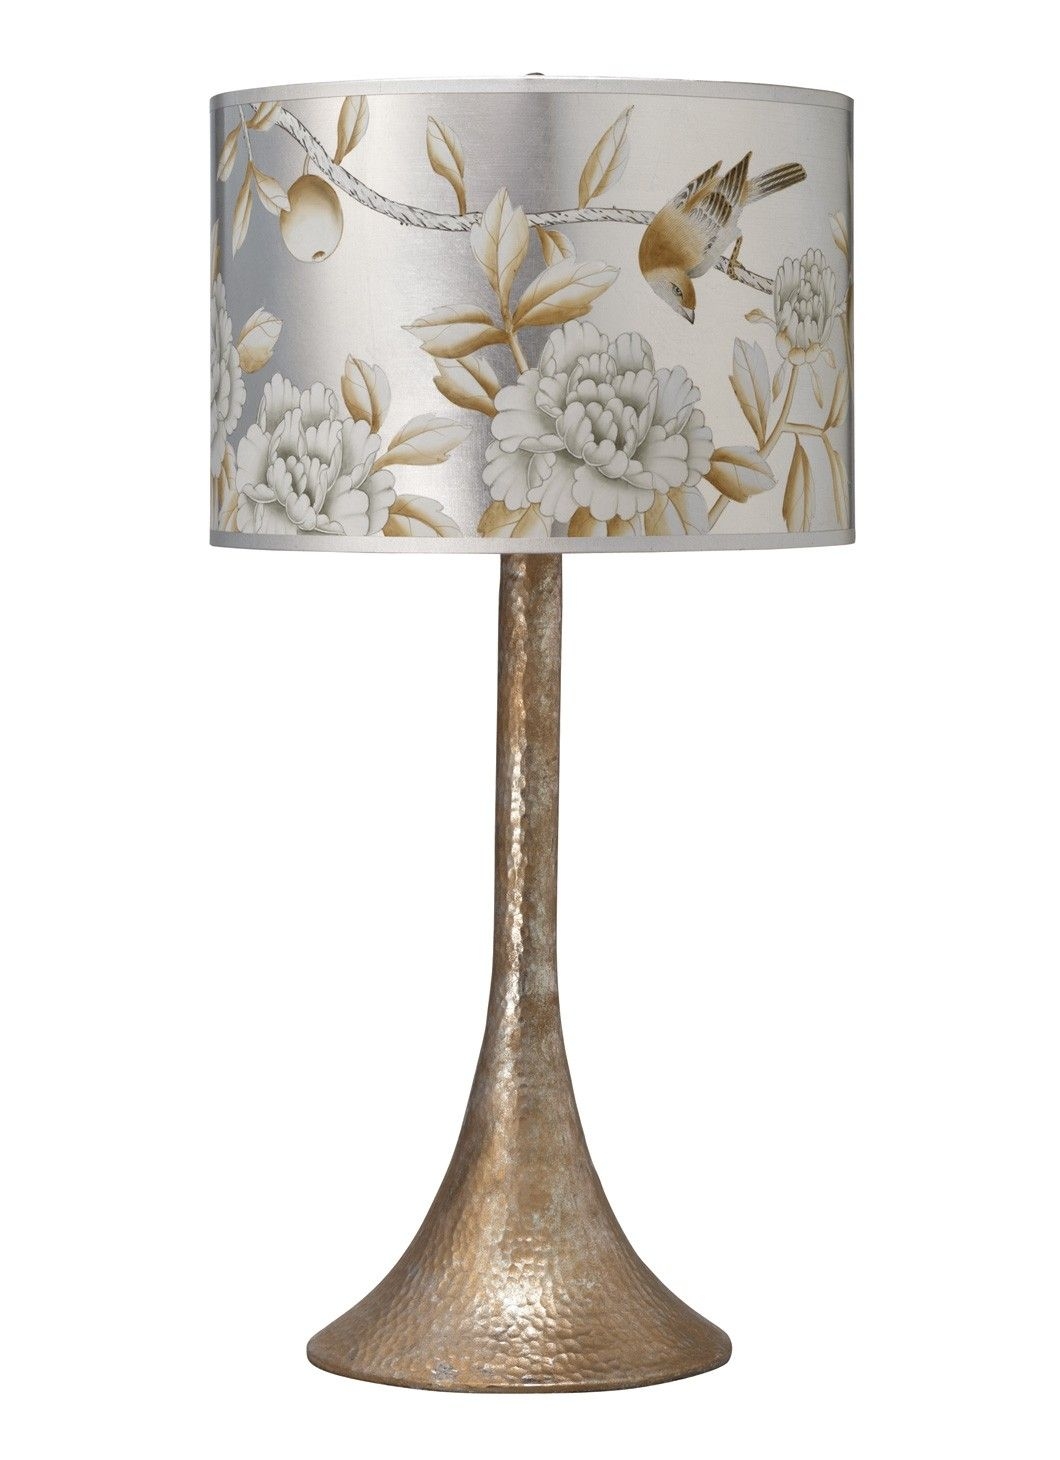 Hammered Metal 33.5" H Table Lamp with Drum Shade